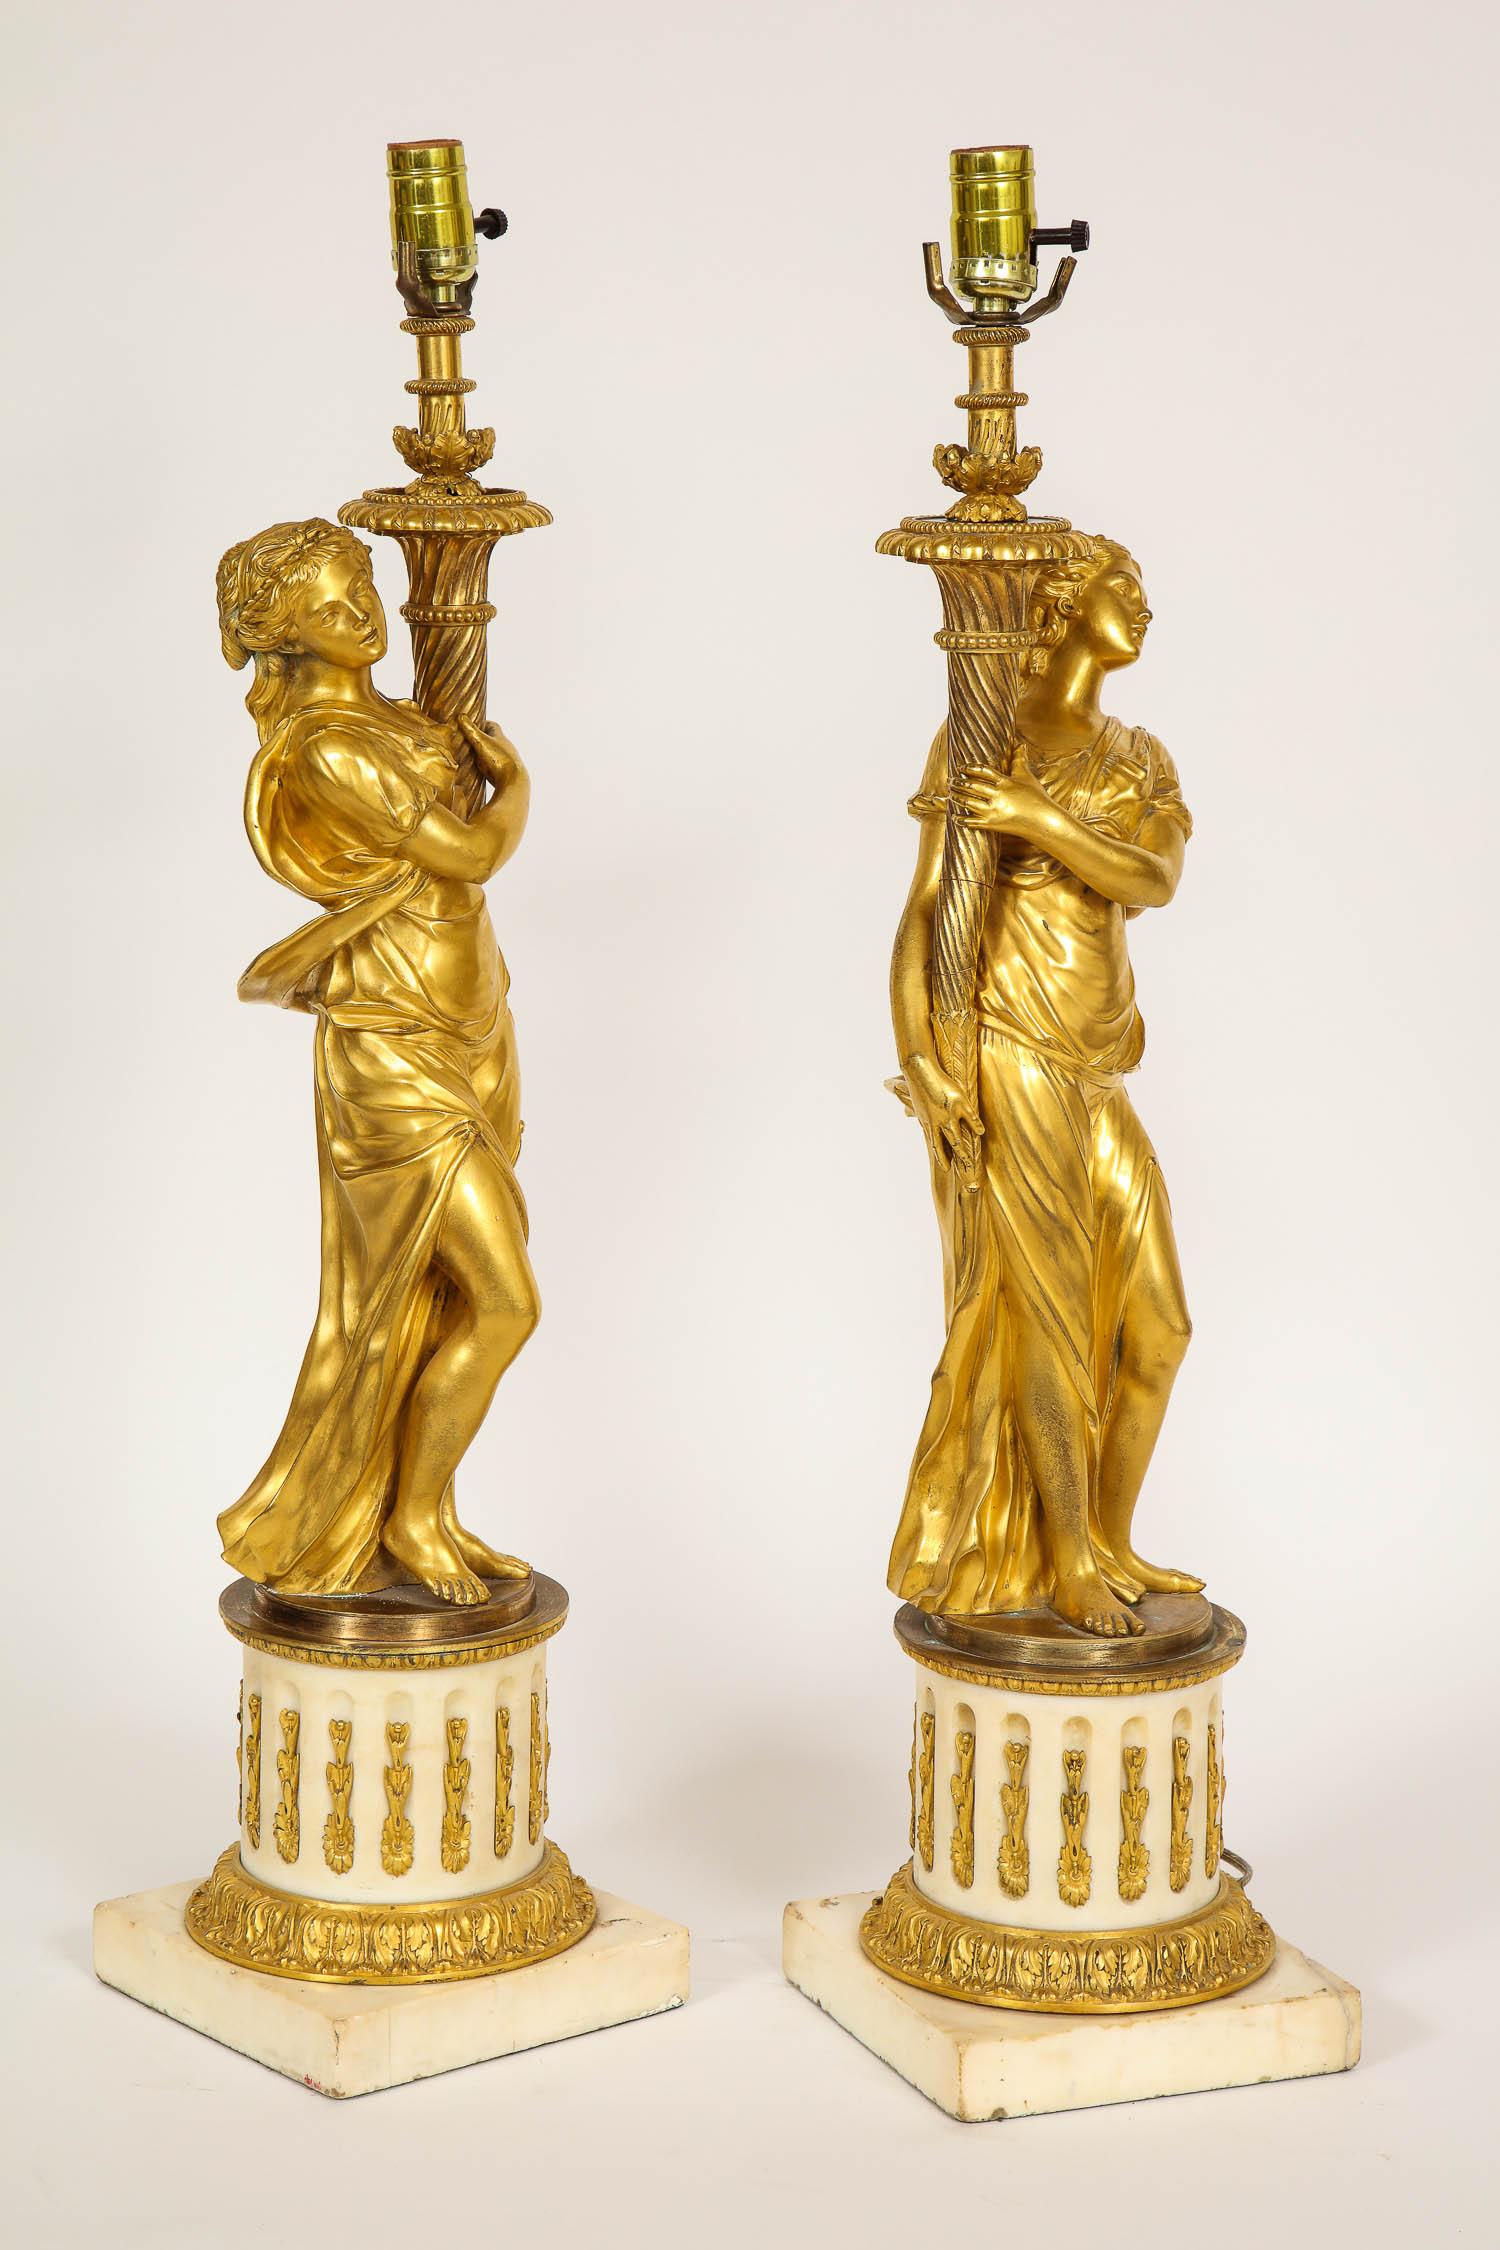 Pair of 18th Century Louis XVI Period Gilt-Bronze Figures of Maidens as Lamps For Sale 3